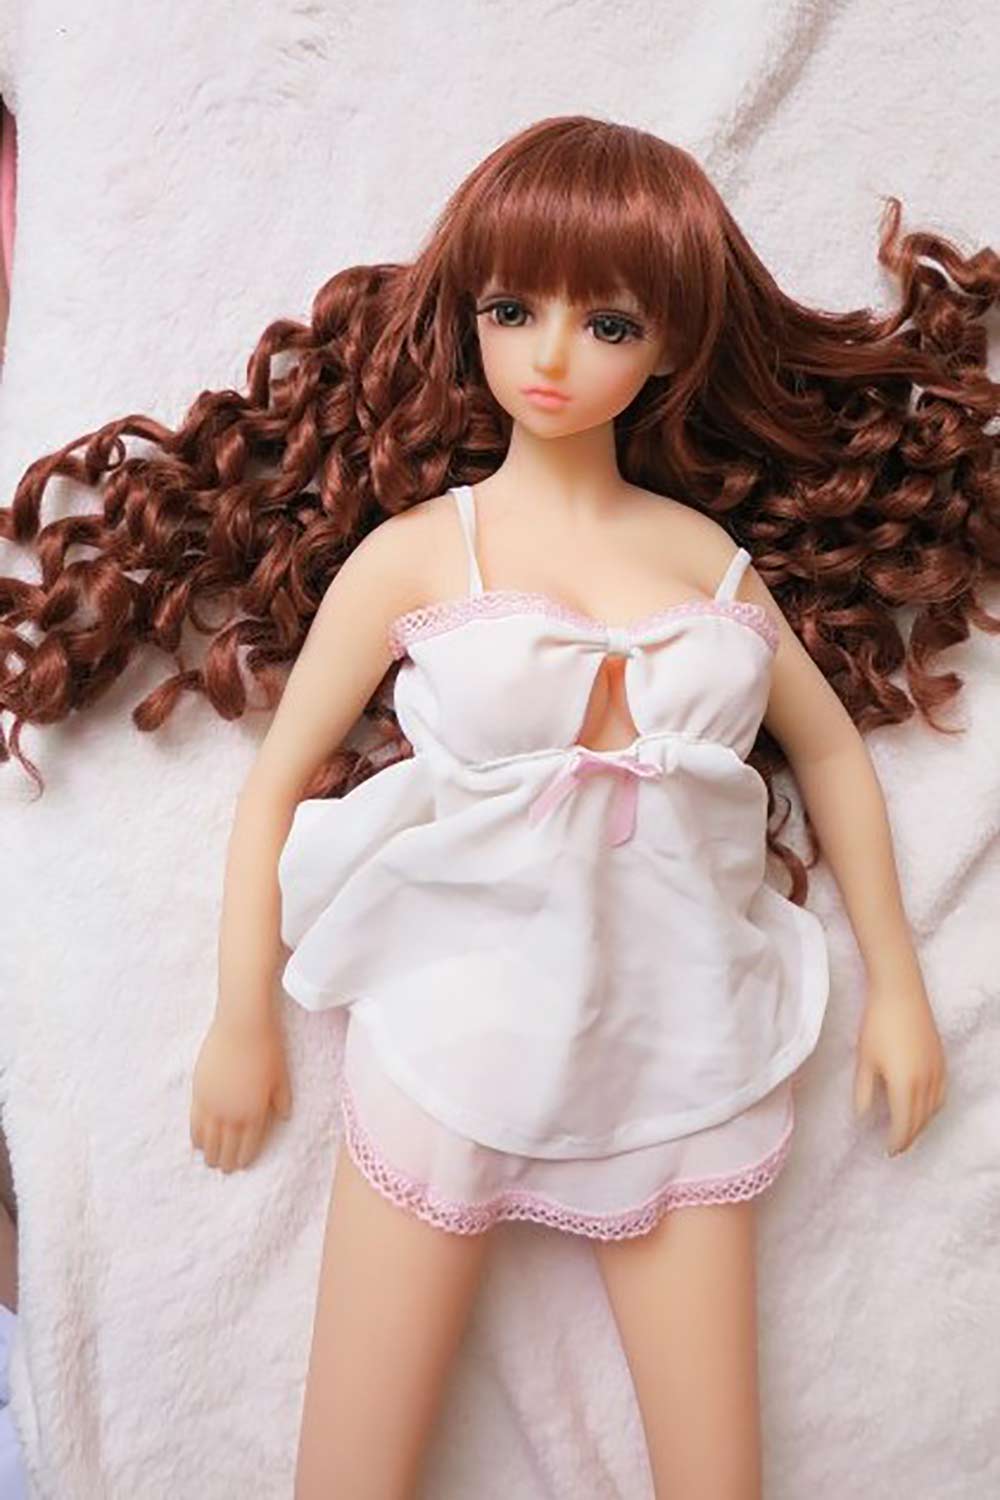 Beautiful Small Girl Sex Doll With B Cup